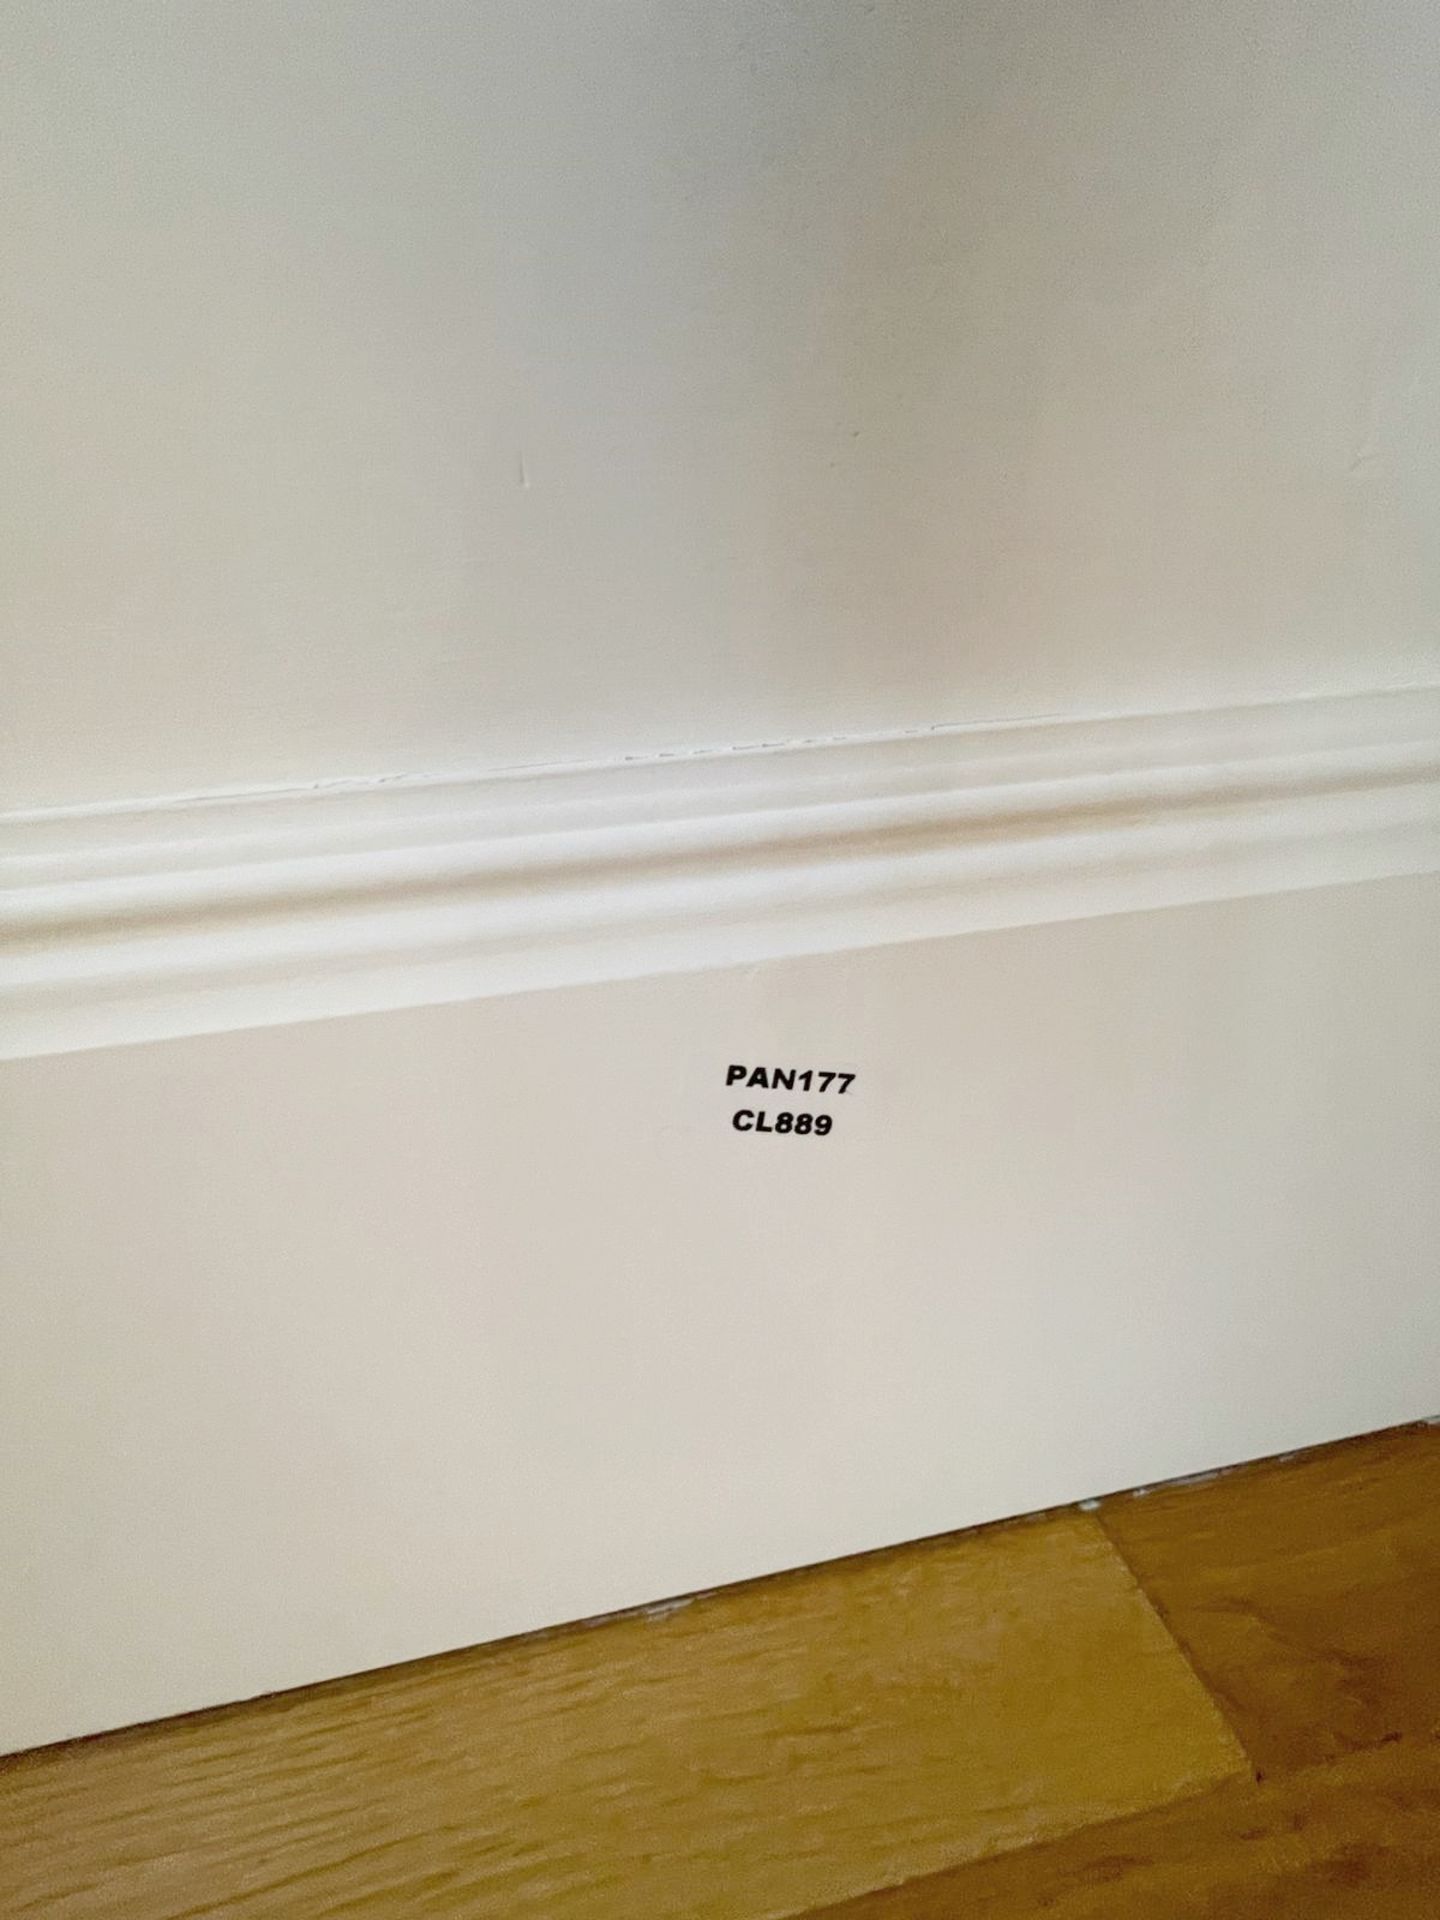 Approximately 17-metres of Timber Painted Skirting Boards in White, Height 23cm - Ref: PAN177 - Image 6 of 8